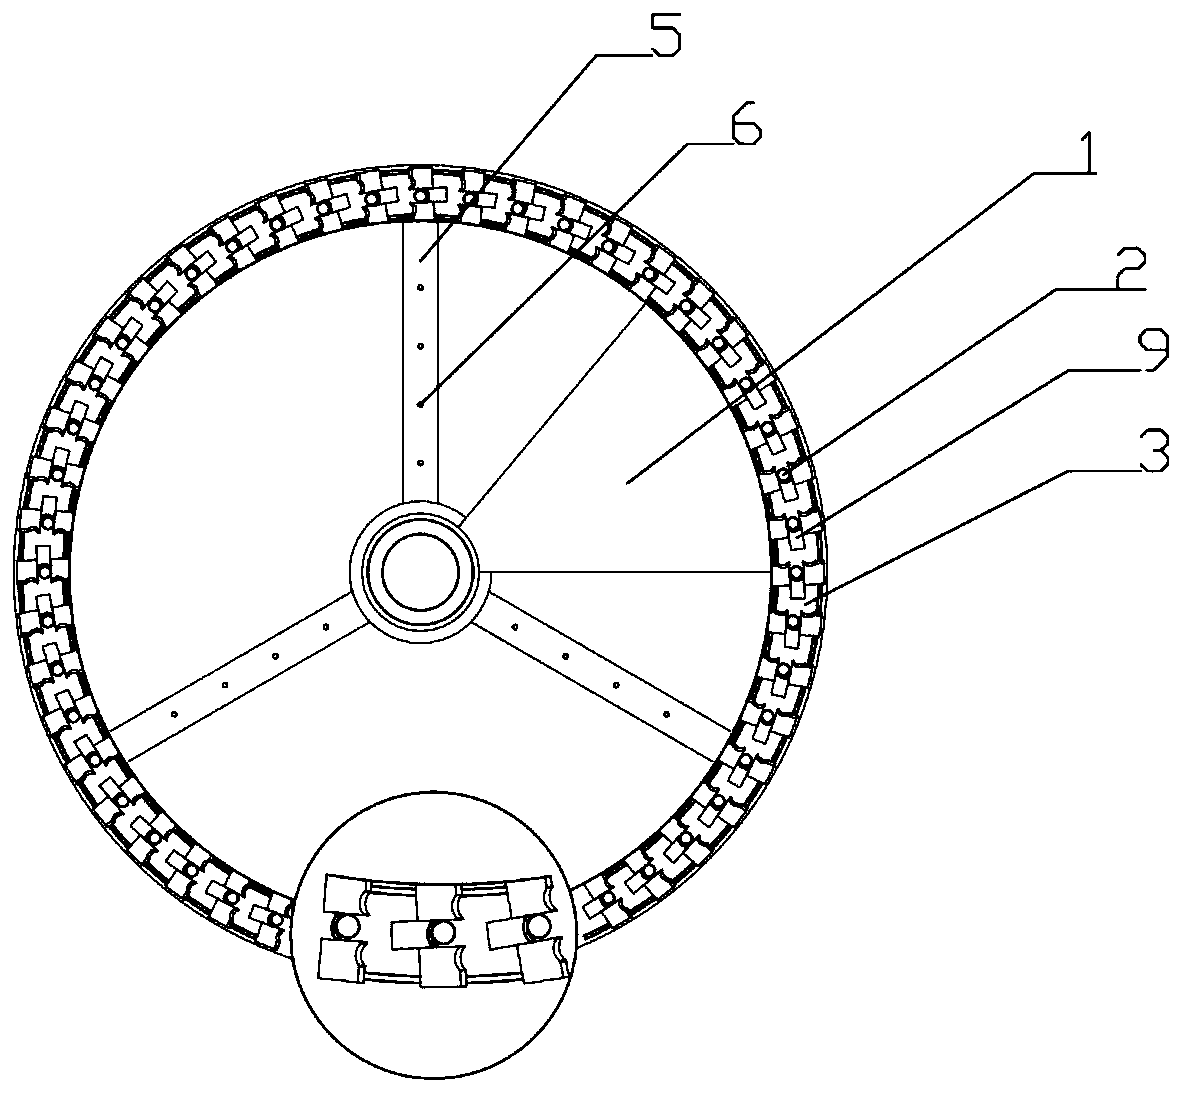 Single-ring porous construction device for removing unsolidified concrete pile head overall